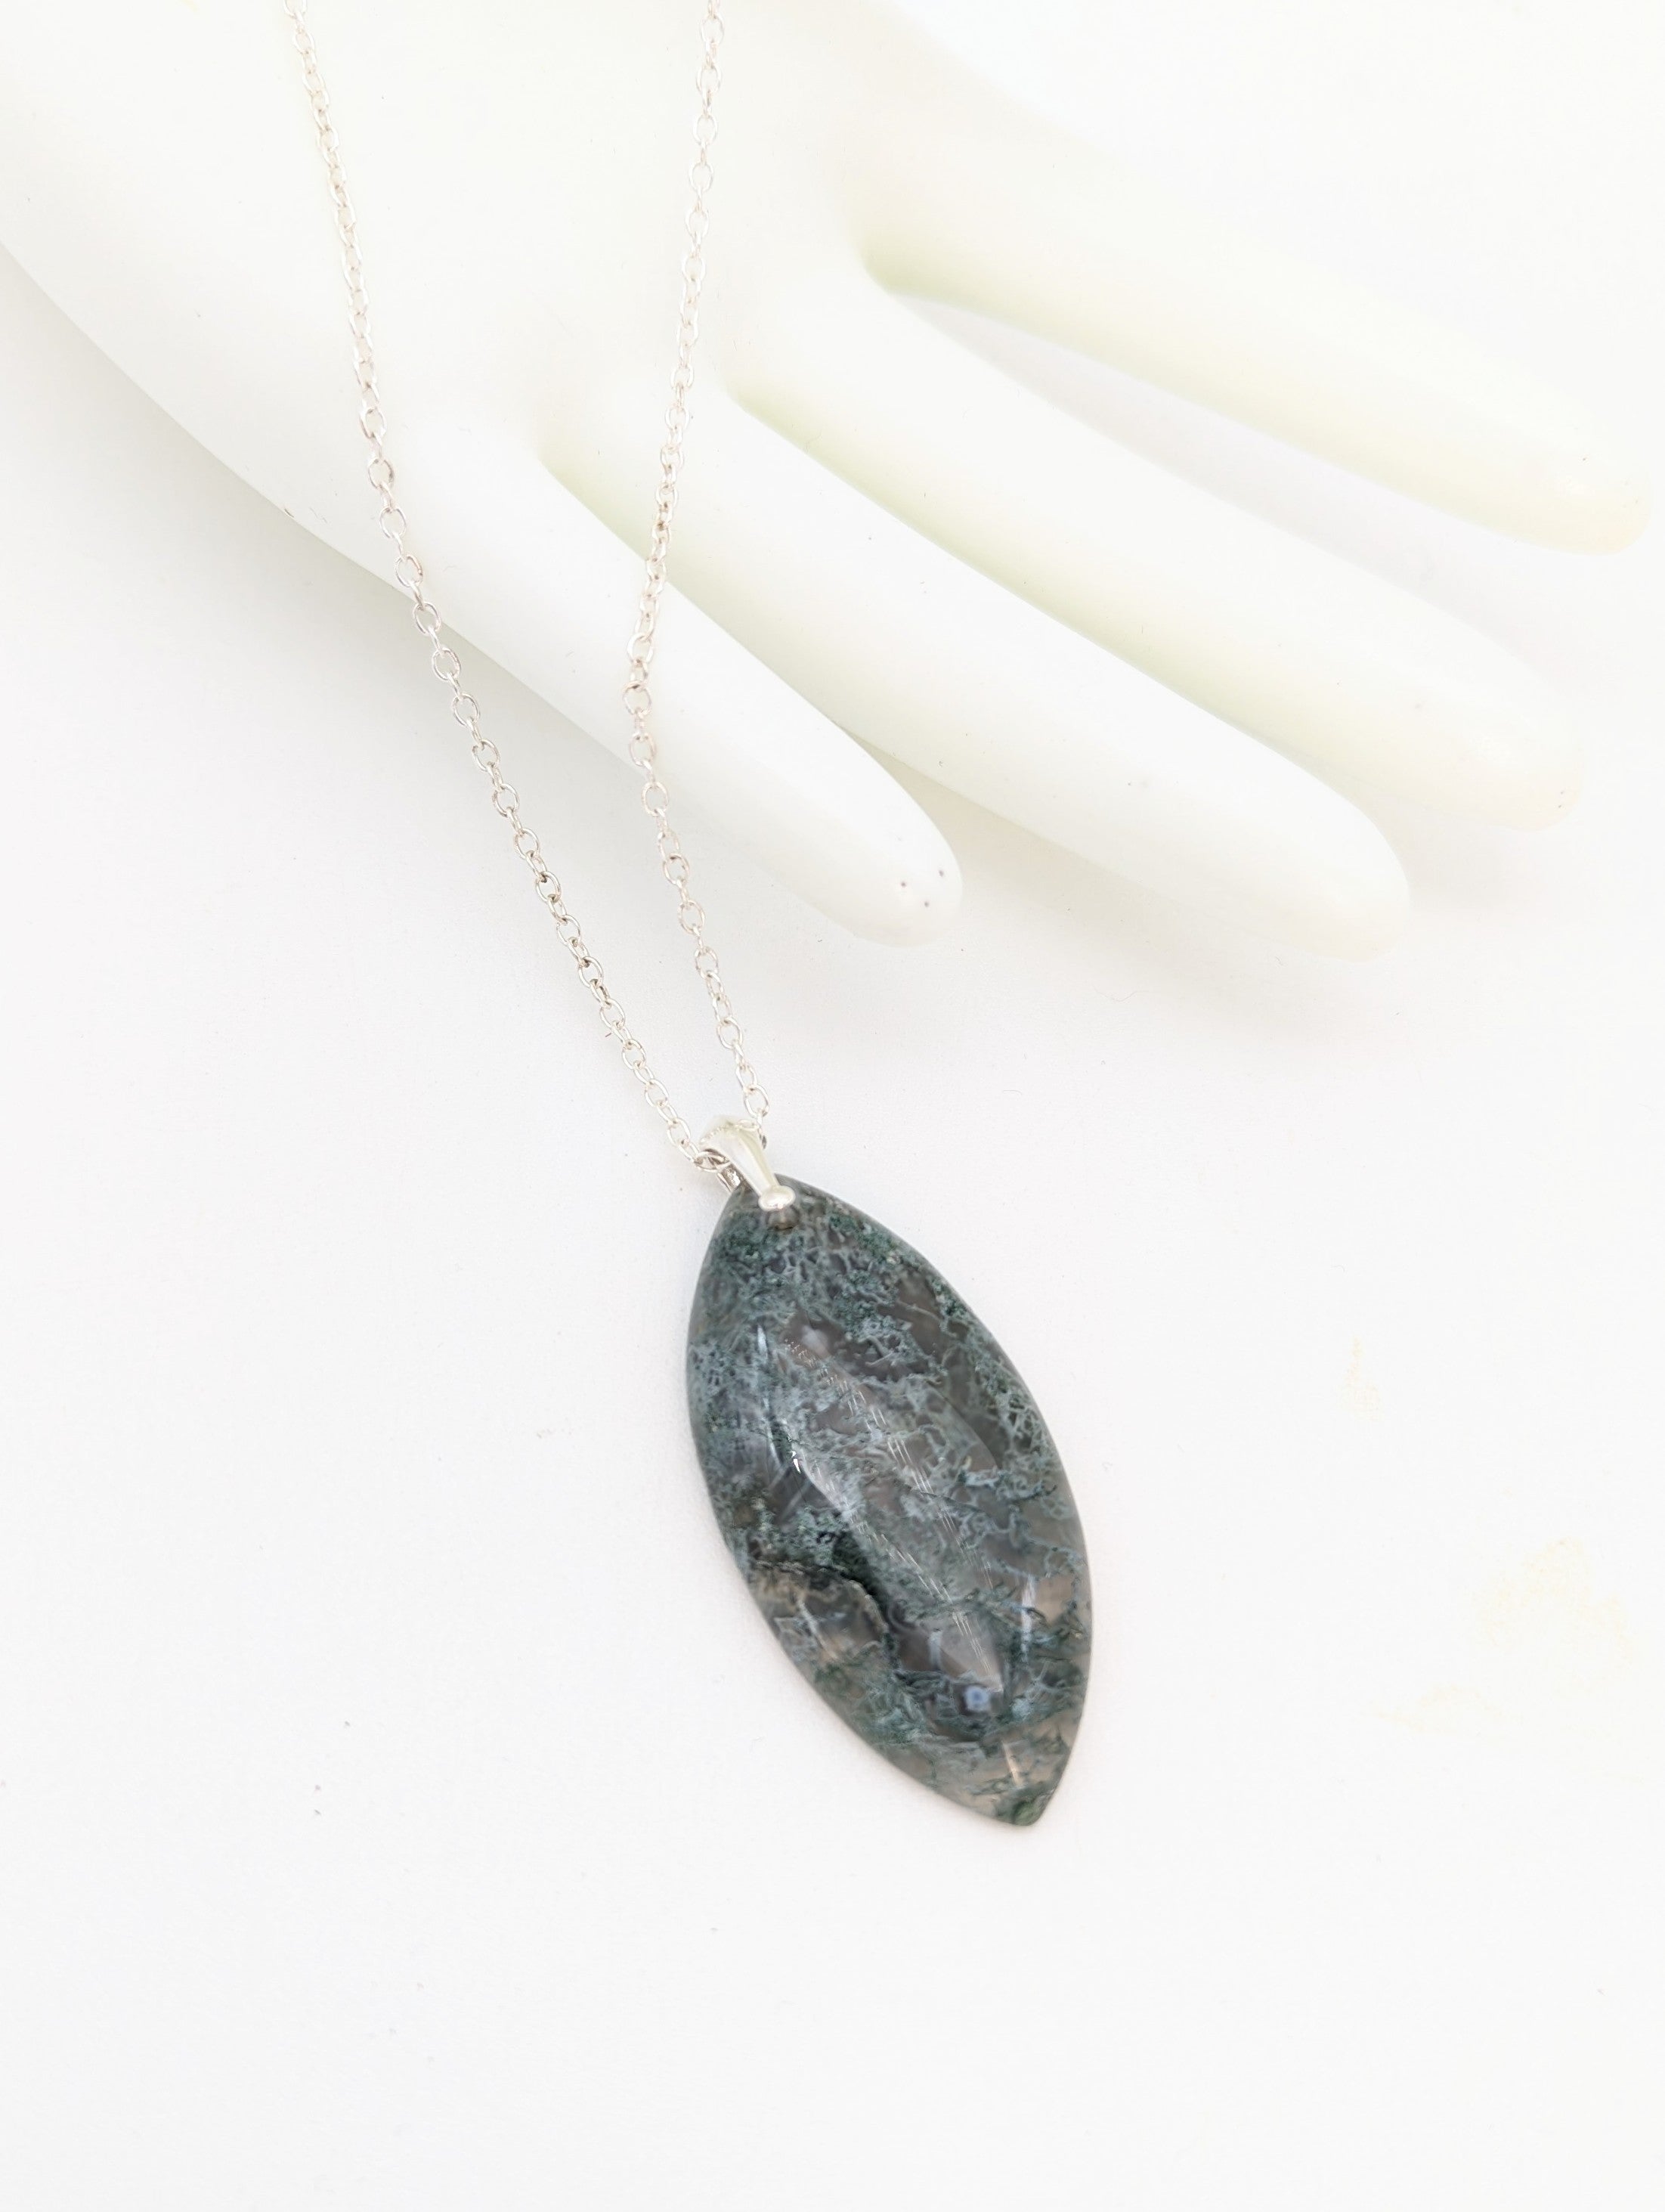 Moss Agate Necklace on Sterling Silver Bail and Chain